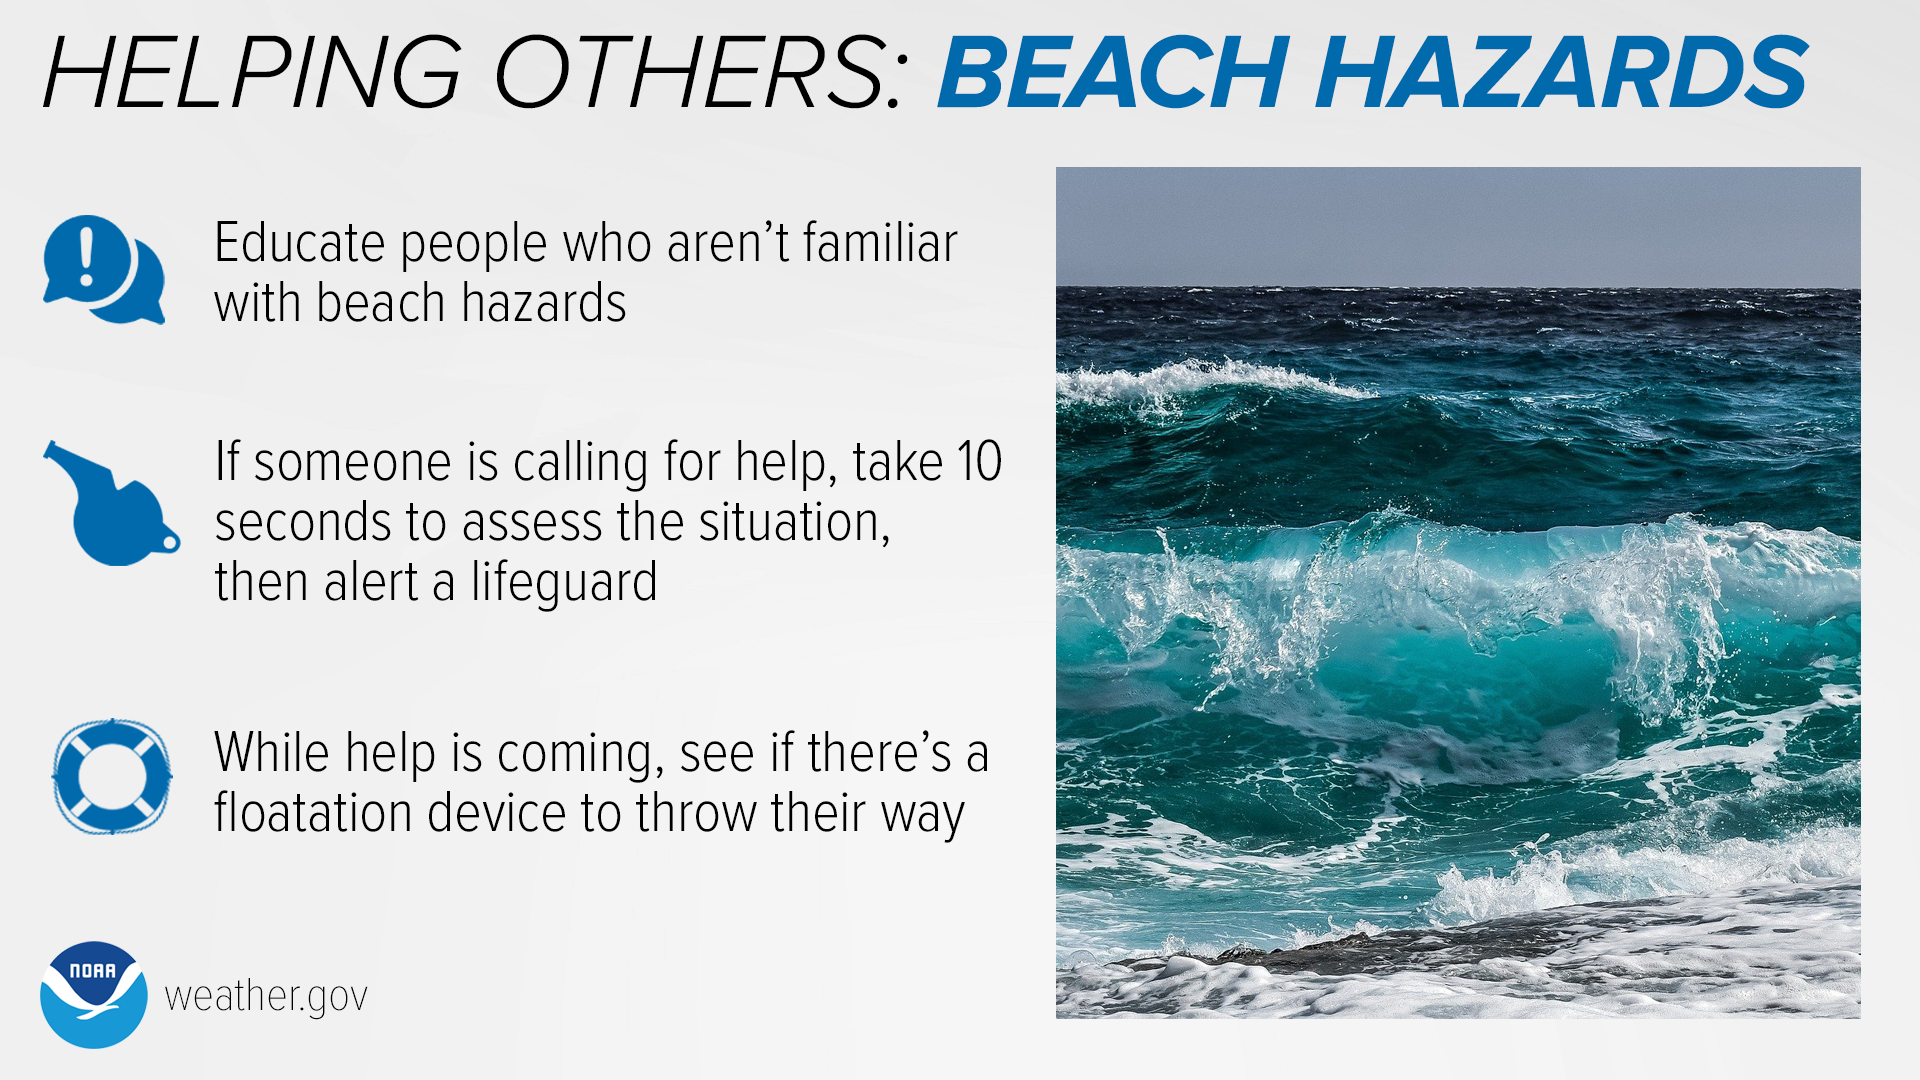 Helping Others: Beach Hazards. Educate people who aren't familiar with beach hazards. If someone is calling for help, take 10 seconds to assess the situation, then alert a lifeguard. While is coming, see if there's a floatation device to throw their way.